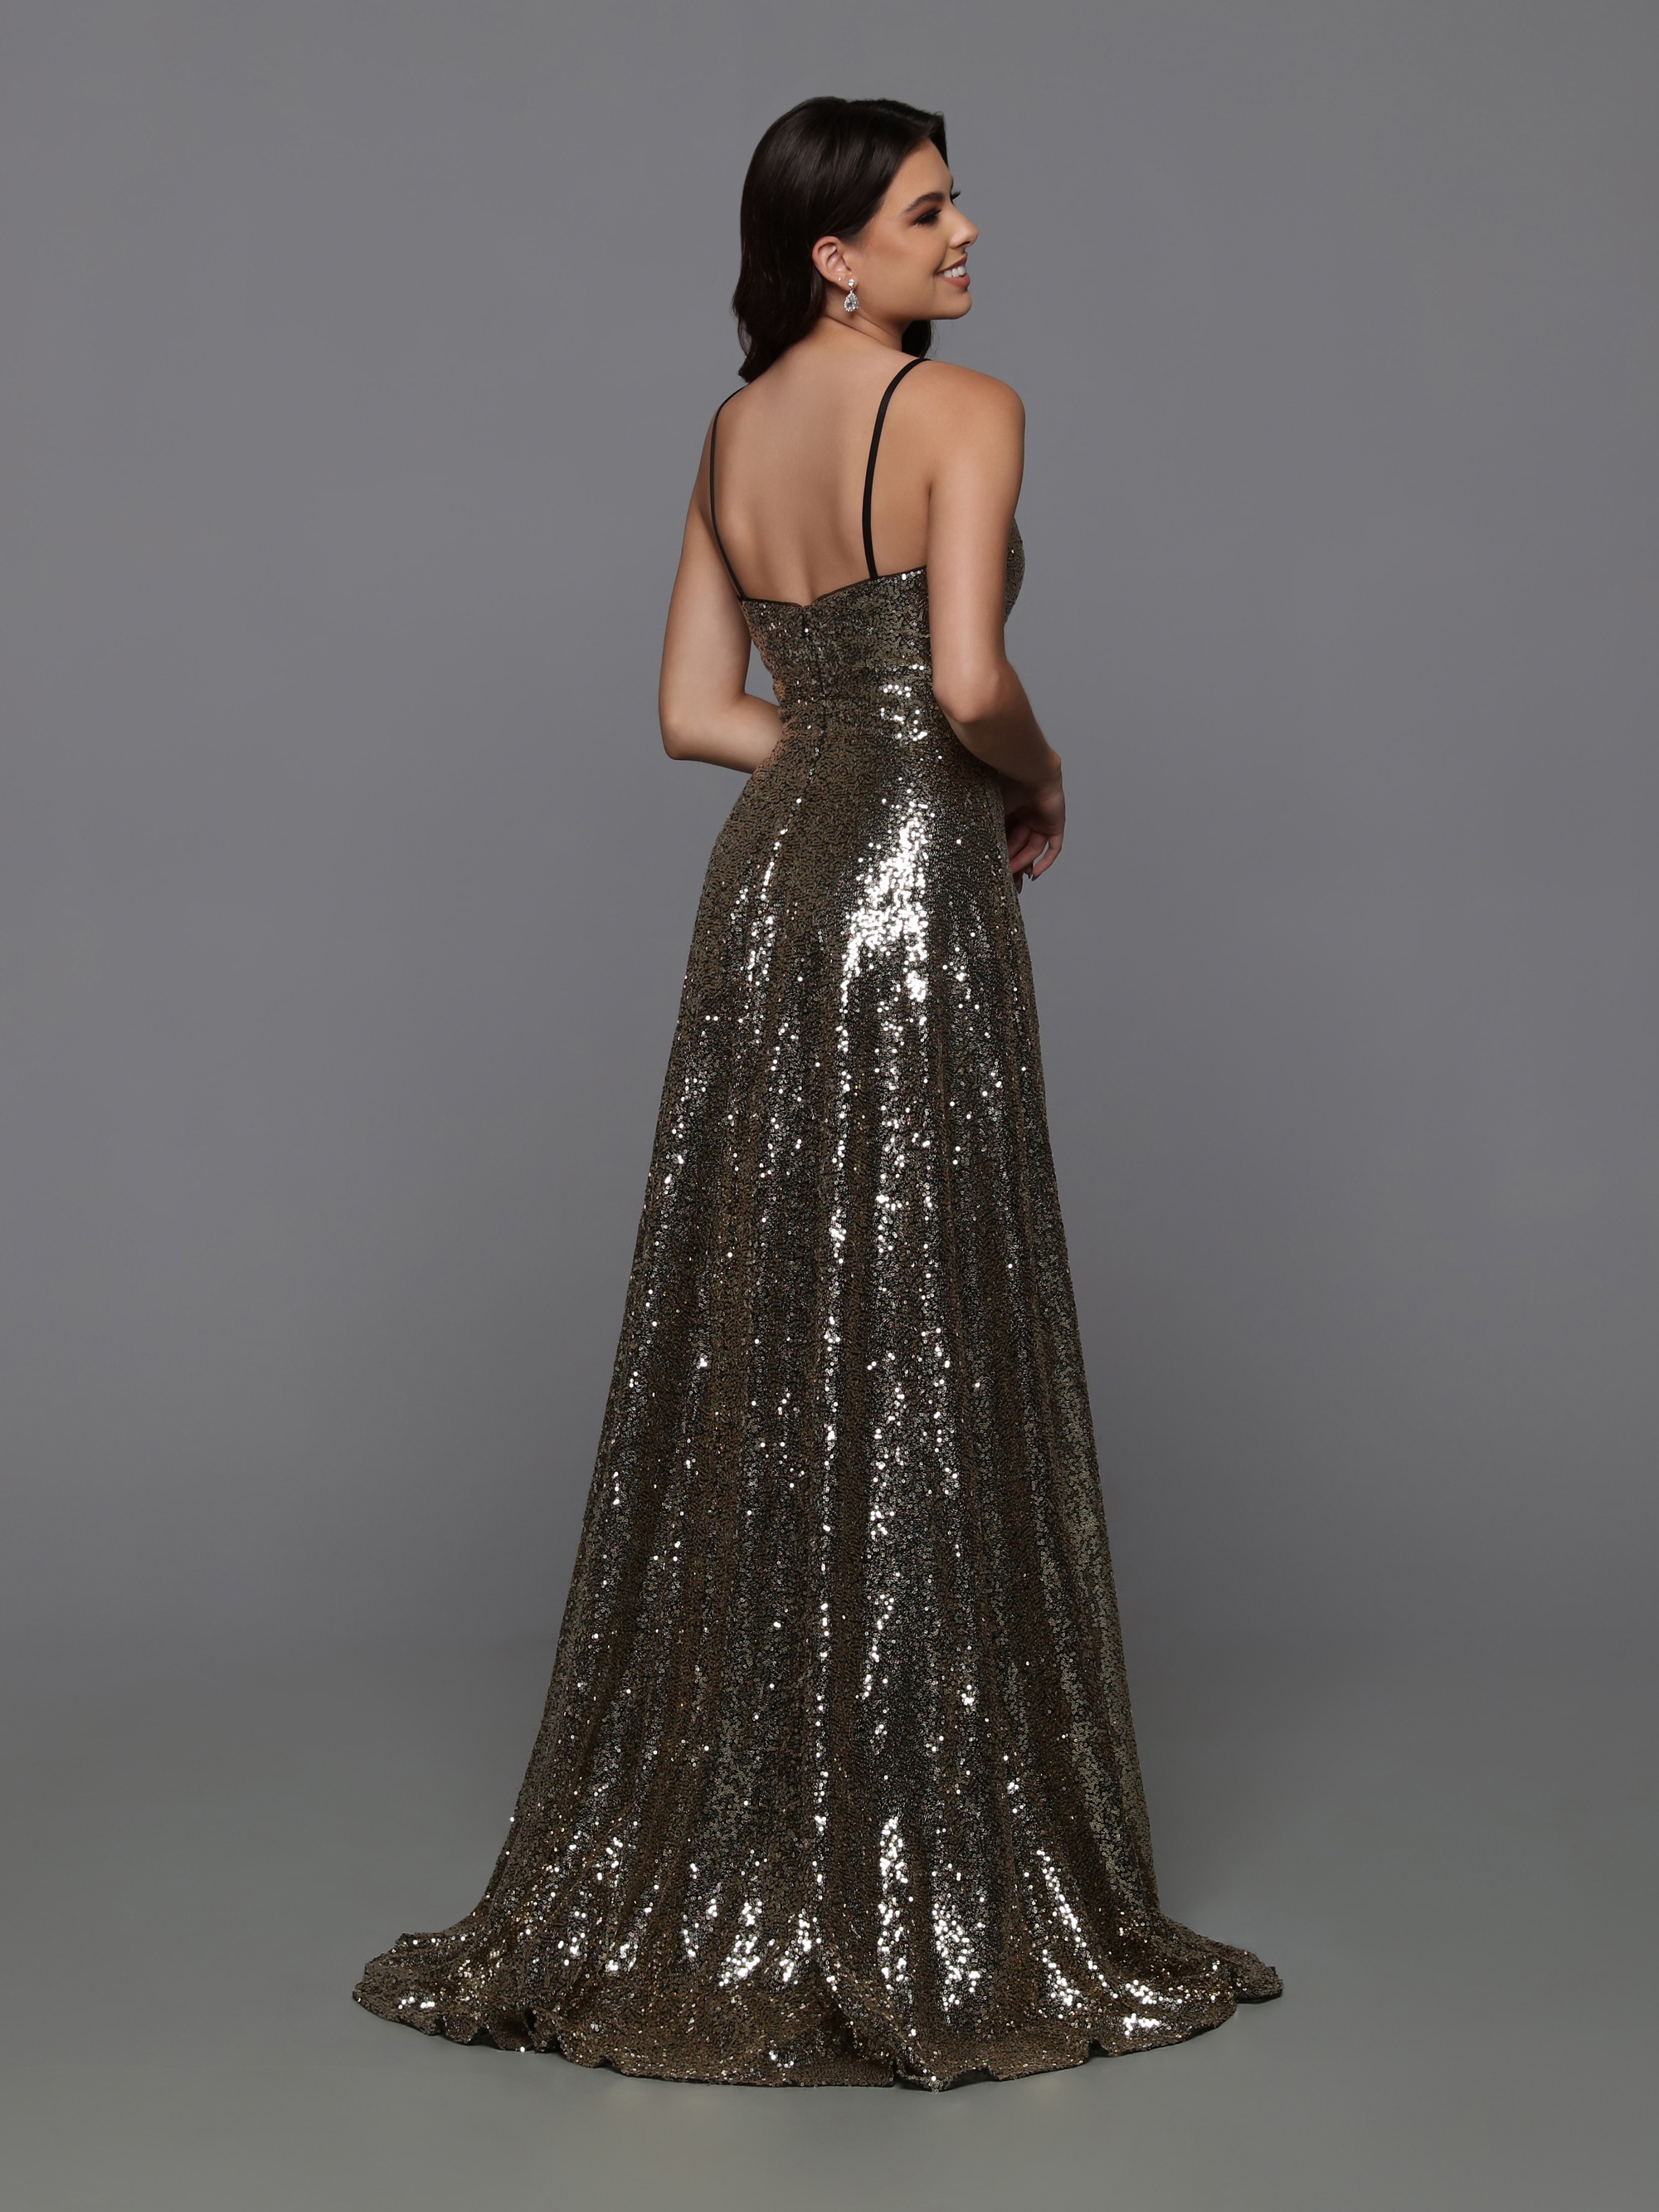 Image showing back view of style #72225